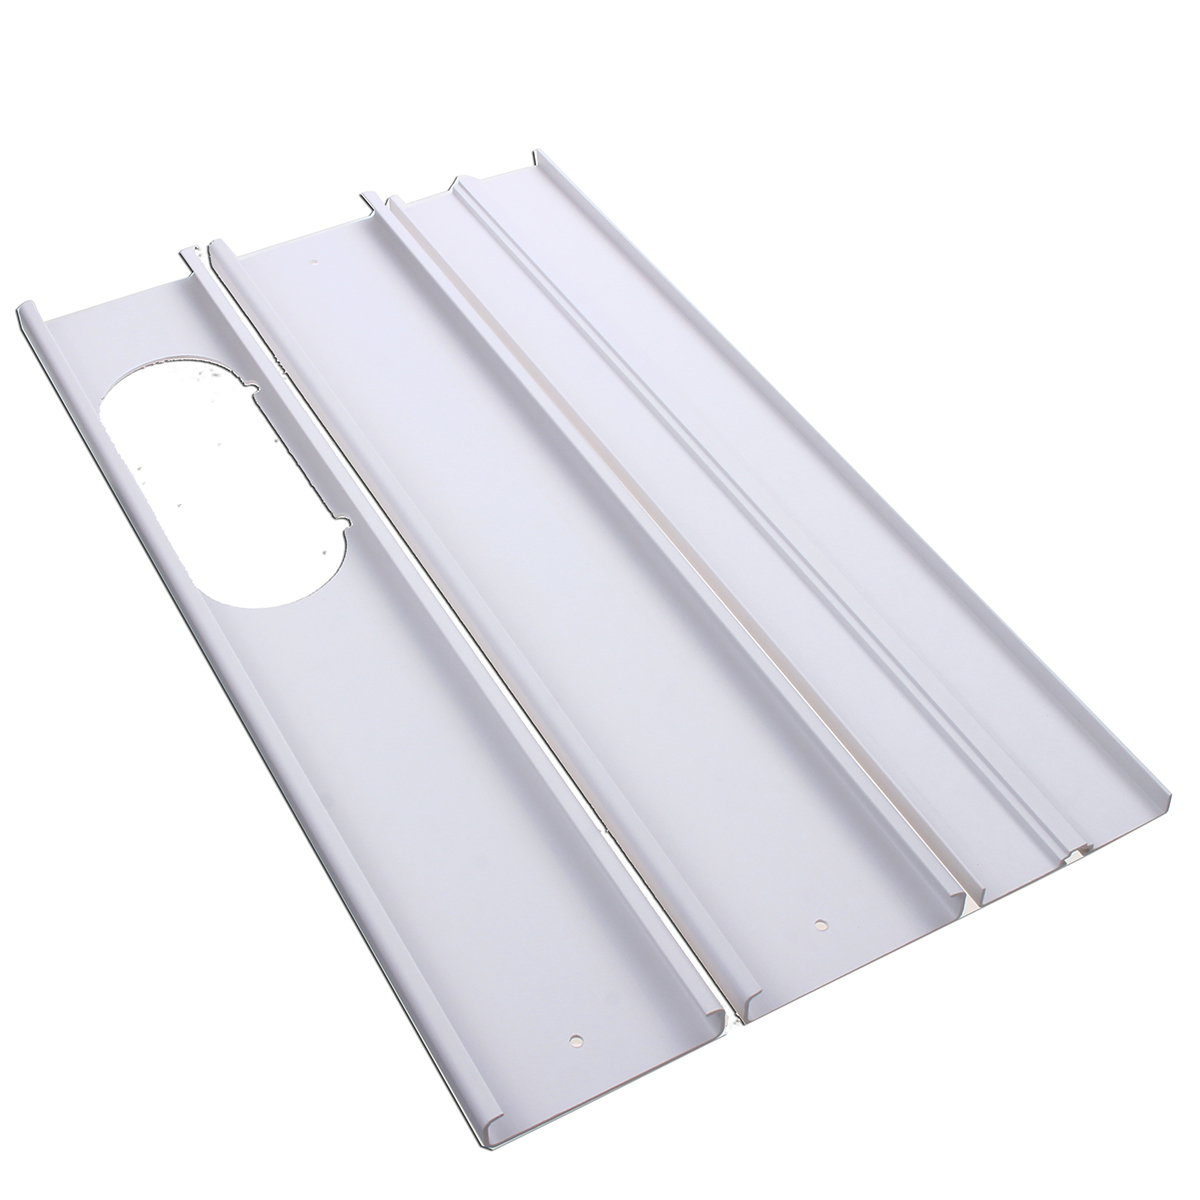 3Pcs-55-165cm-Adjustable-Window-Slide-Kit-Plate-Air-Conditioner-Wind-Shield-For-Portable-Air-Conditi-1632431-2